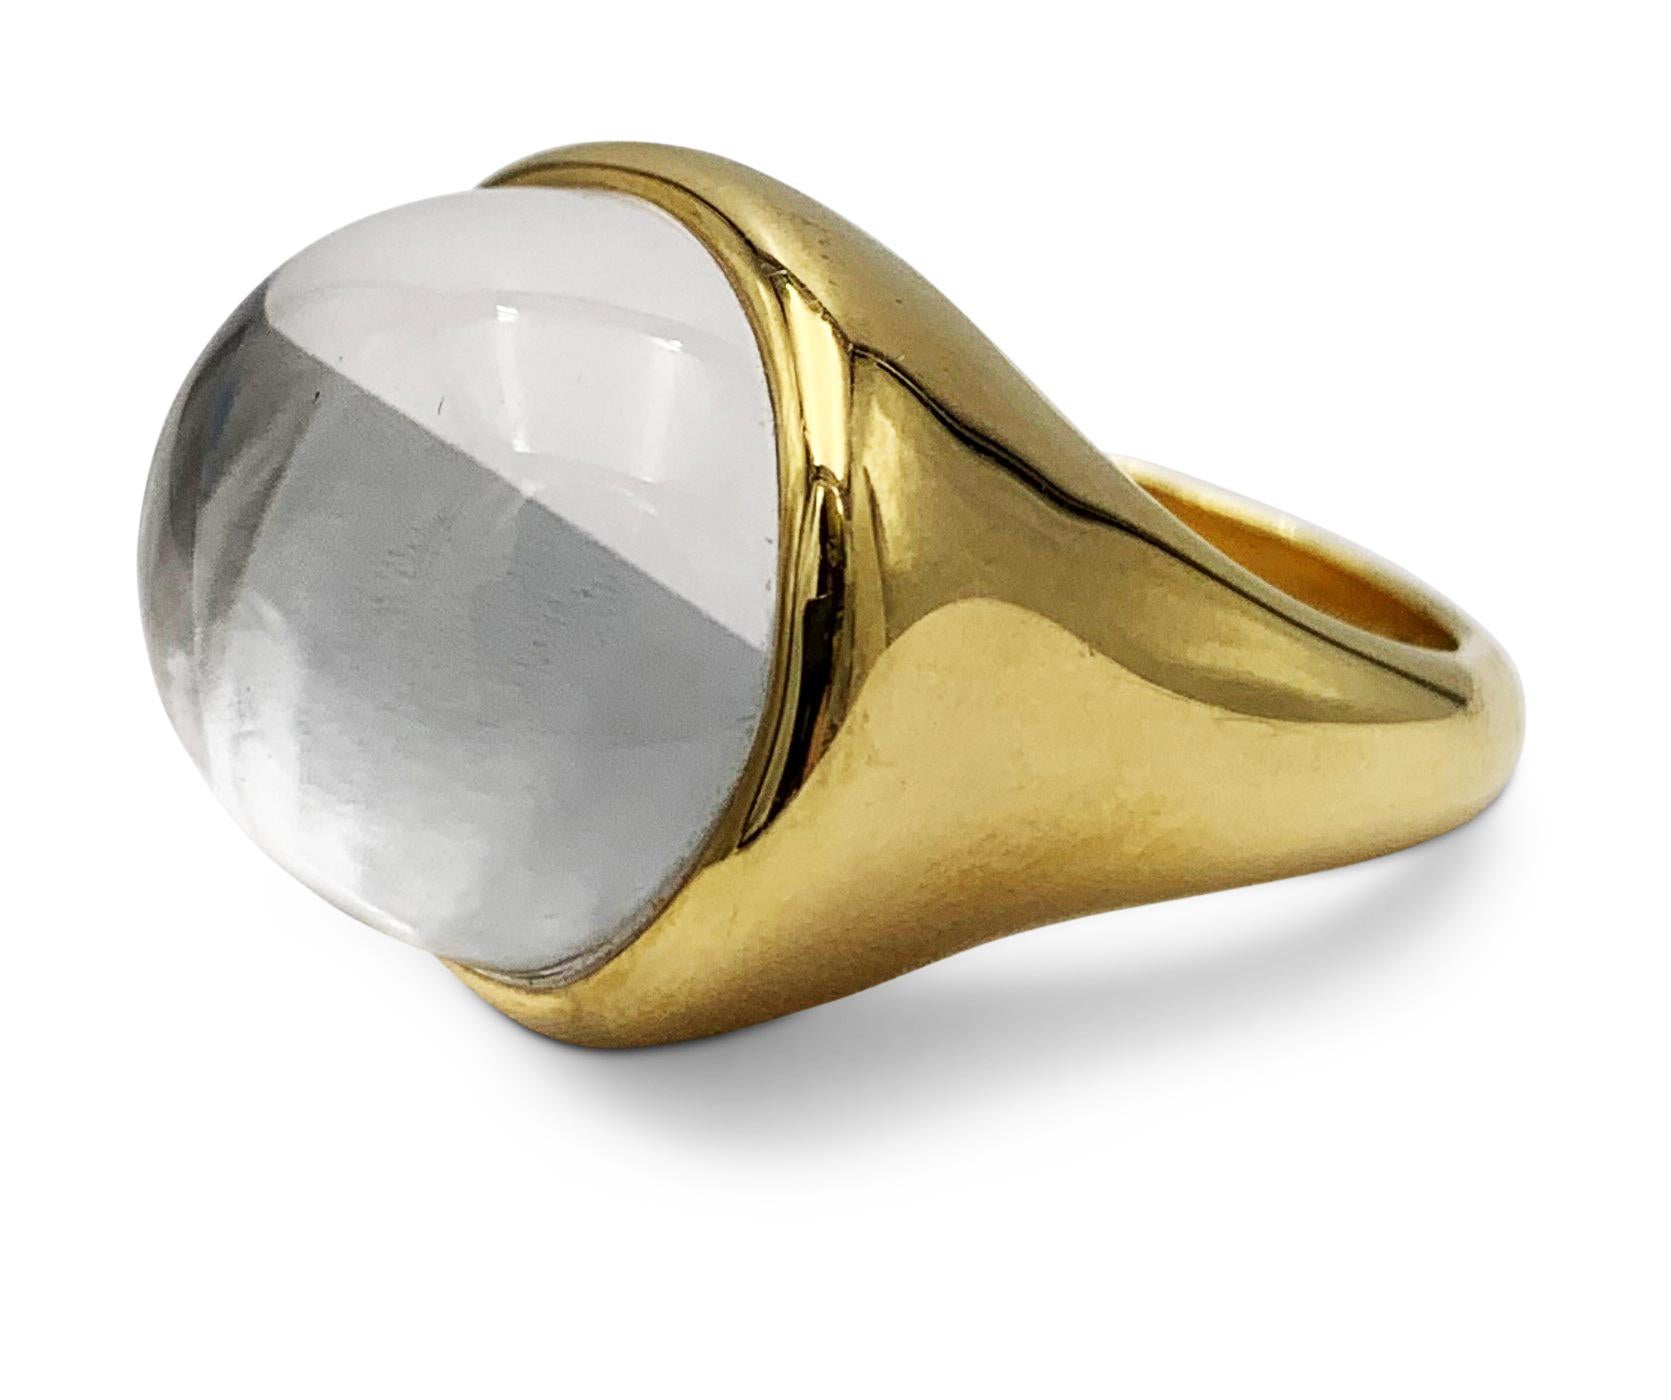 Authentic Tiffany & Co. Elsa Peretti cabochon rock crystal ring crafted in 18 karat yellow gold. Signed Tiffany & Co., Elsa Peretti, 750, Hong Kong. Ring size 7. Not presented with the original box or papers. CIRCA 2010s. 